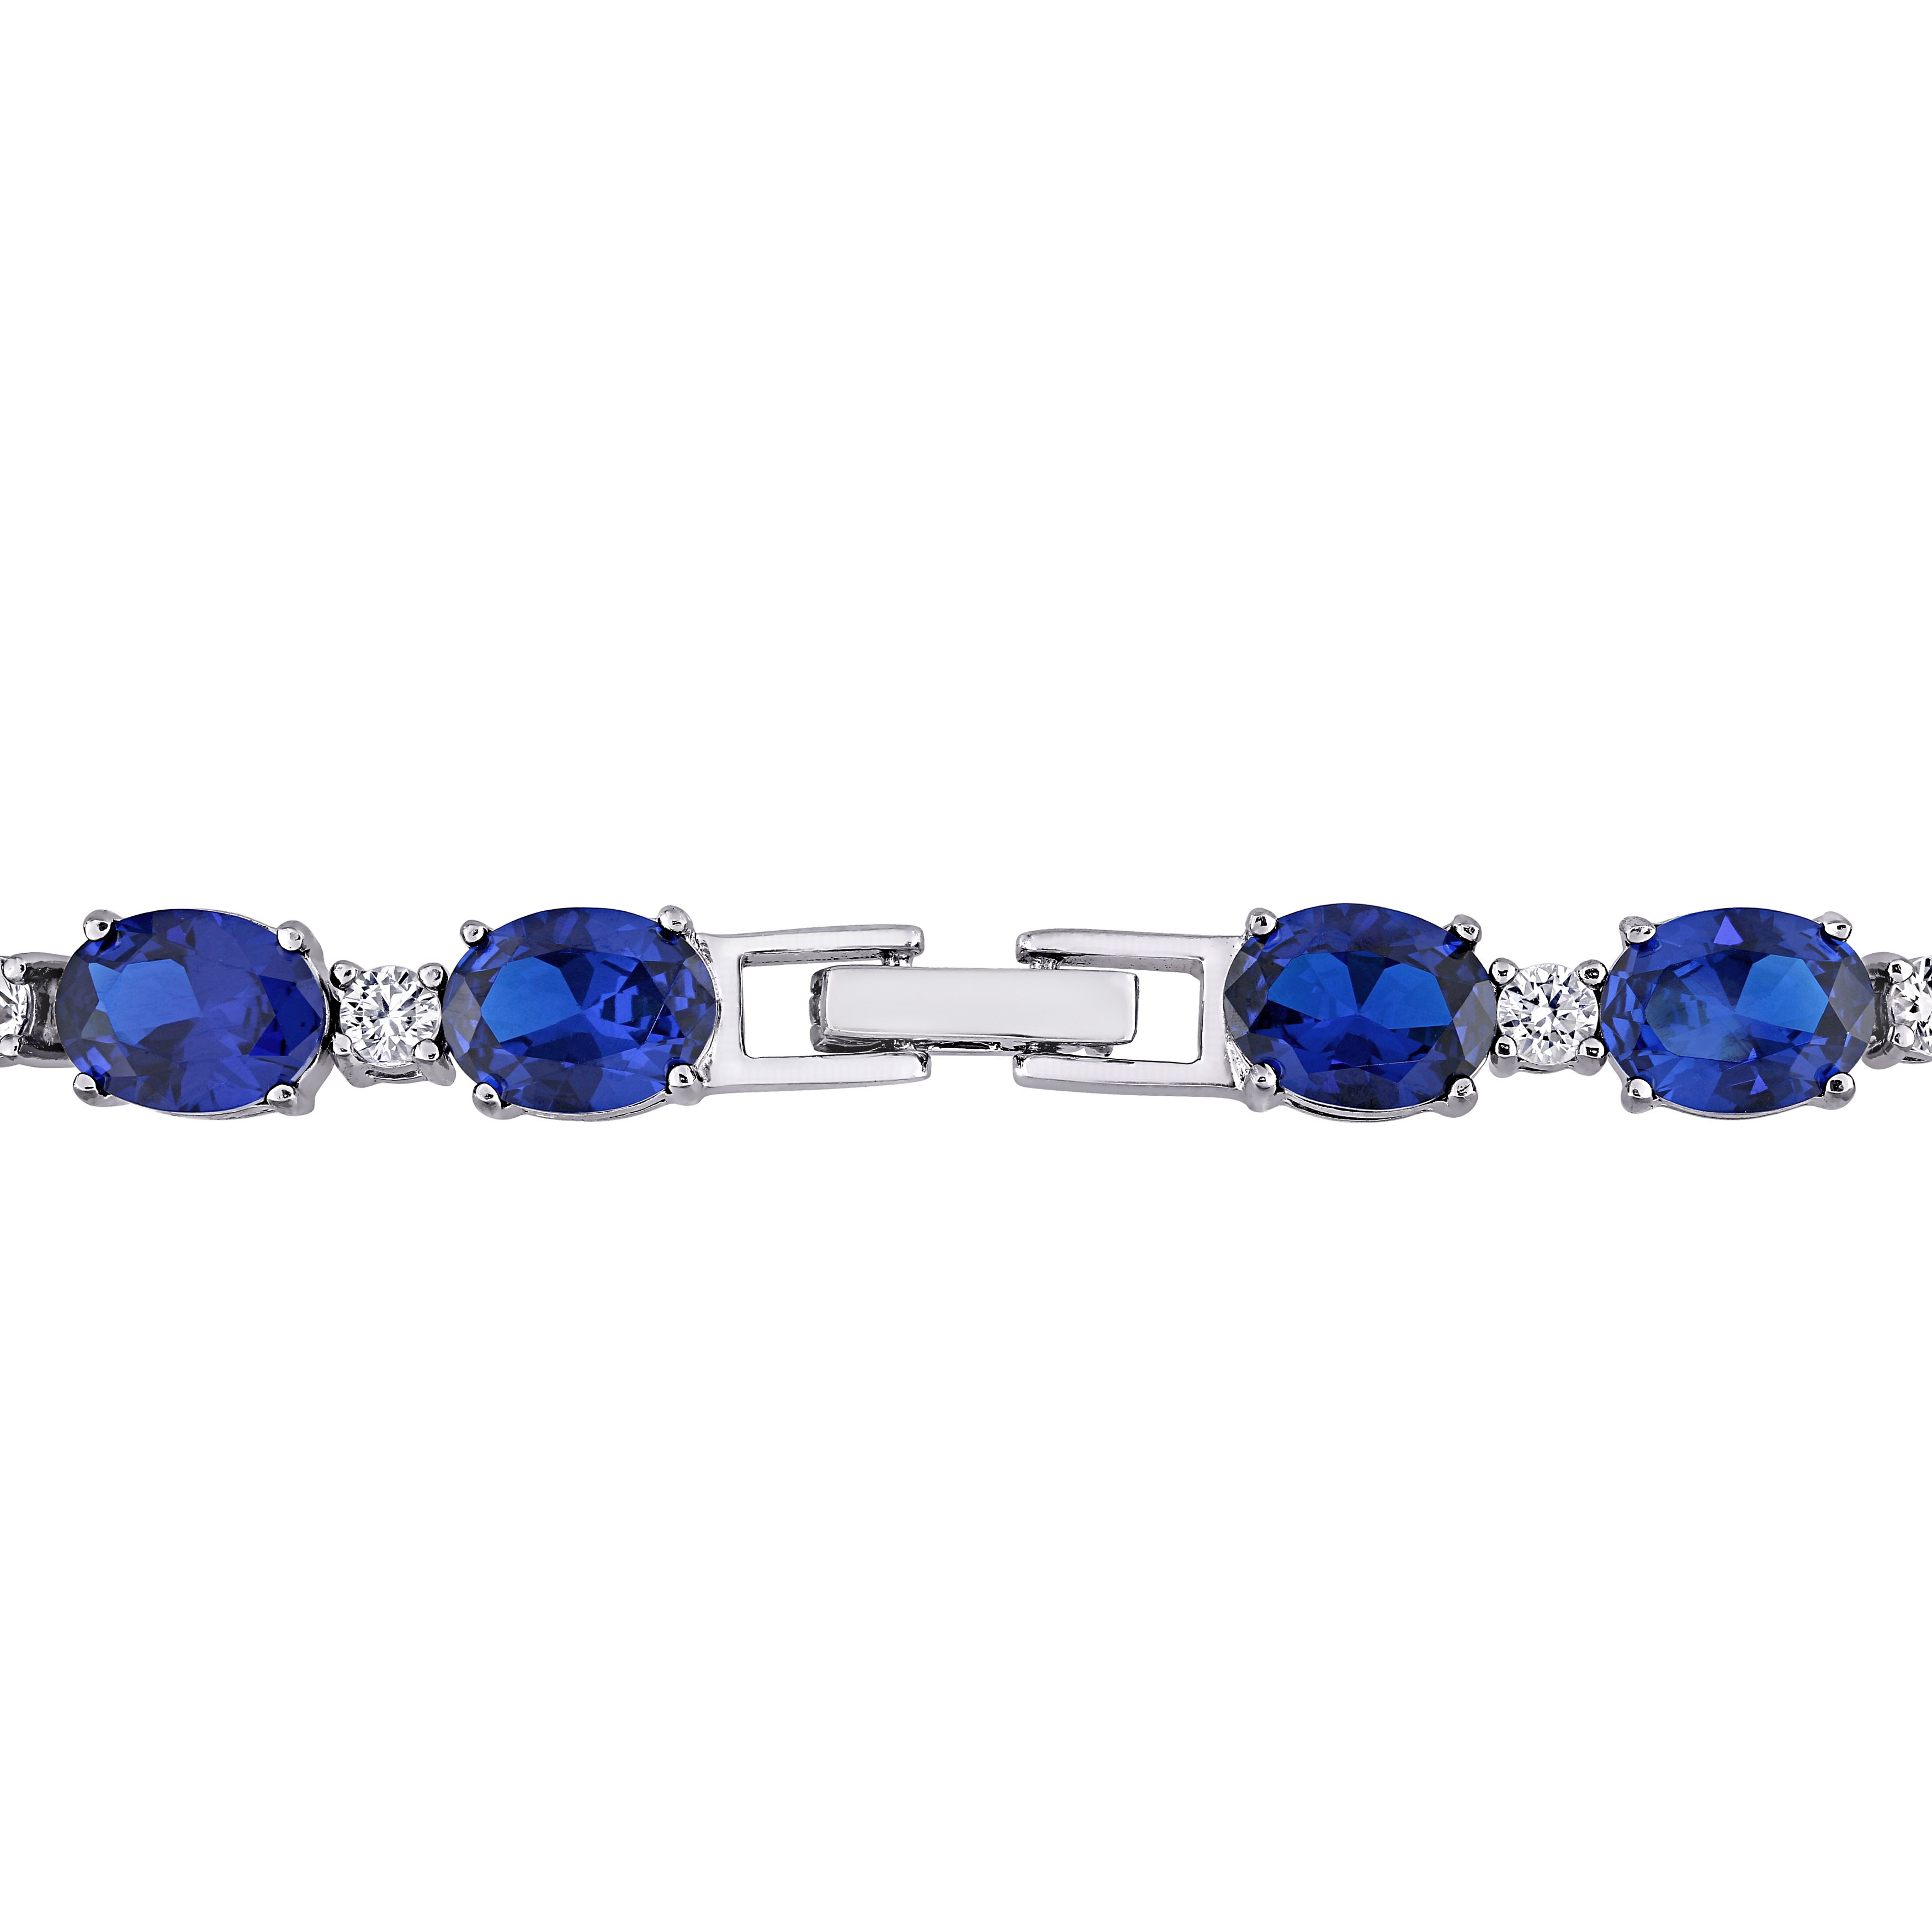 32 CT TGW Oval Created Blue and White Sapphire Bracelet in Sterling Silver